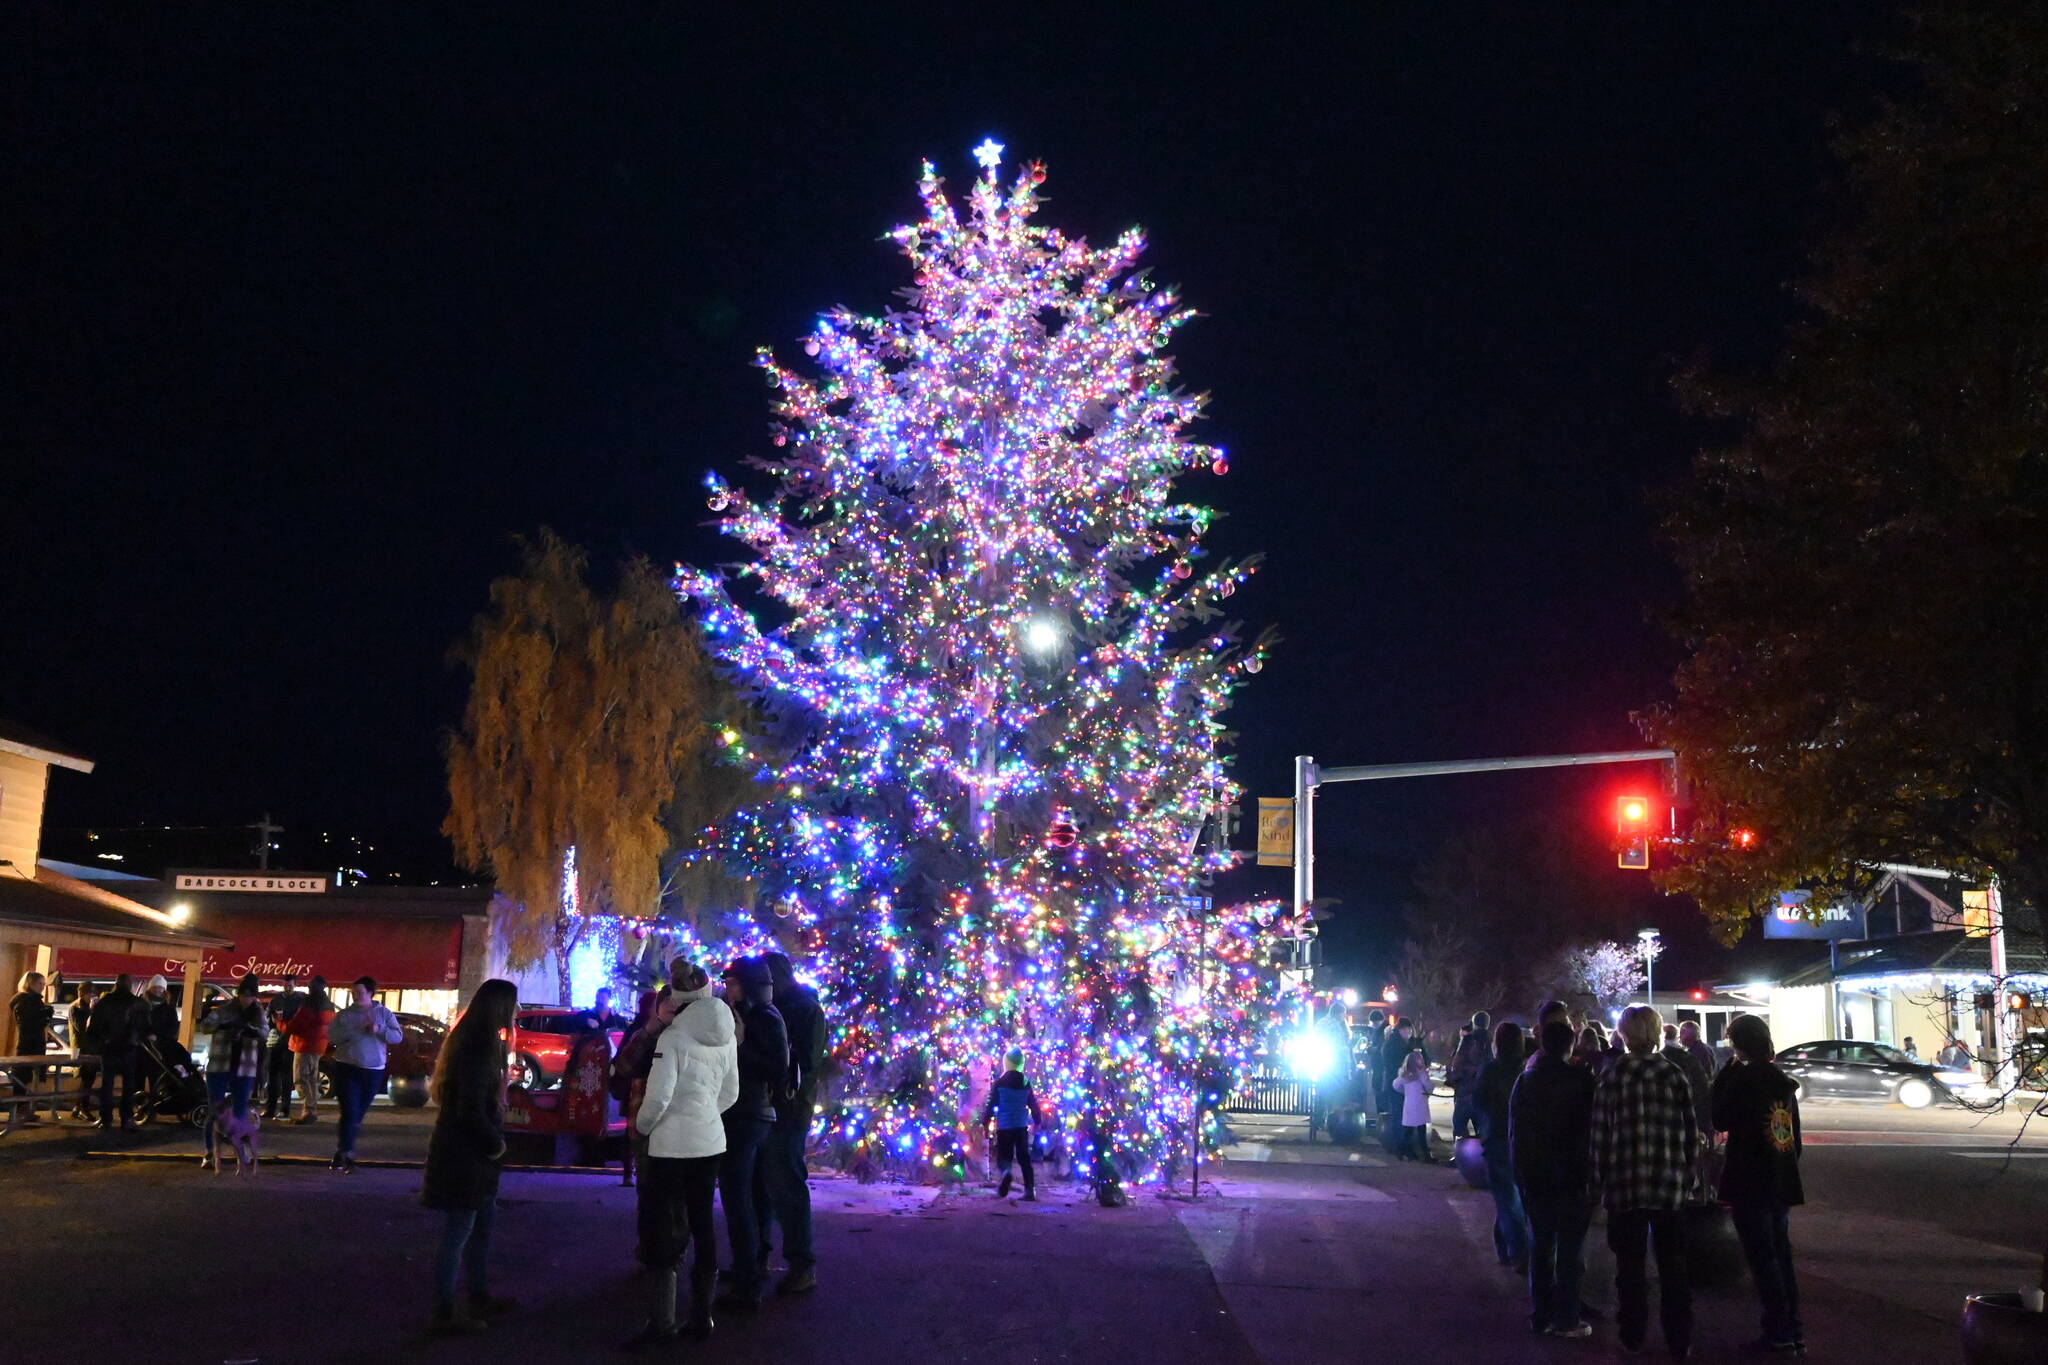 Sequim Gazette photo by Michael Dashiell / People flock to Sequim’s downtown Christmas Tree at a tree-lighting ceremony on Saturday, Nov. 26, at Centennial Place. The major sponsor for the tree lighting, organizers note, is Sound Community Bank, with in-kind sponsors including Accurate Angle Crane, The Home Depot and the City of Sequim.